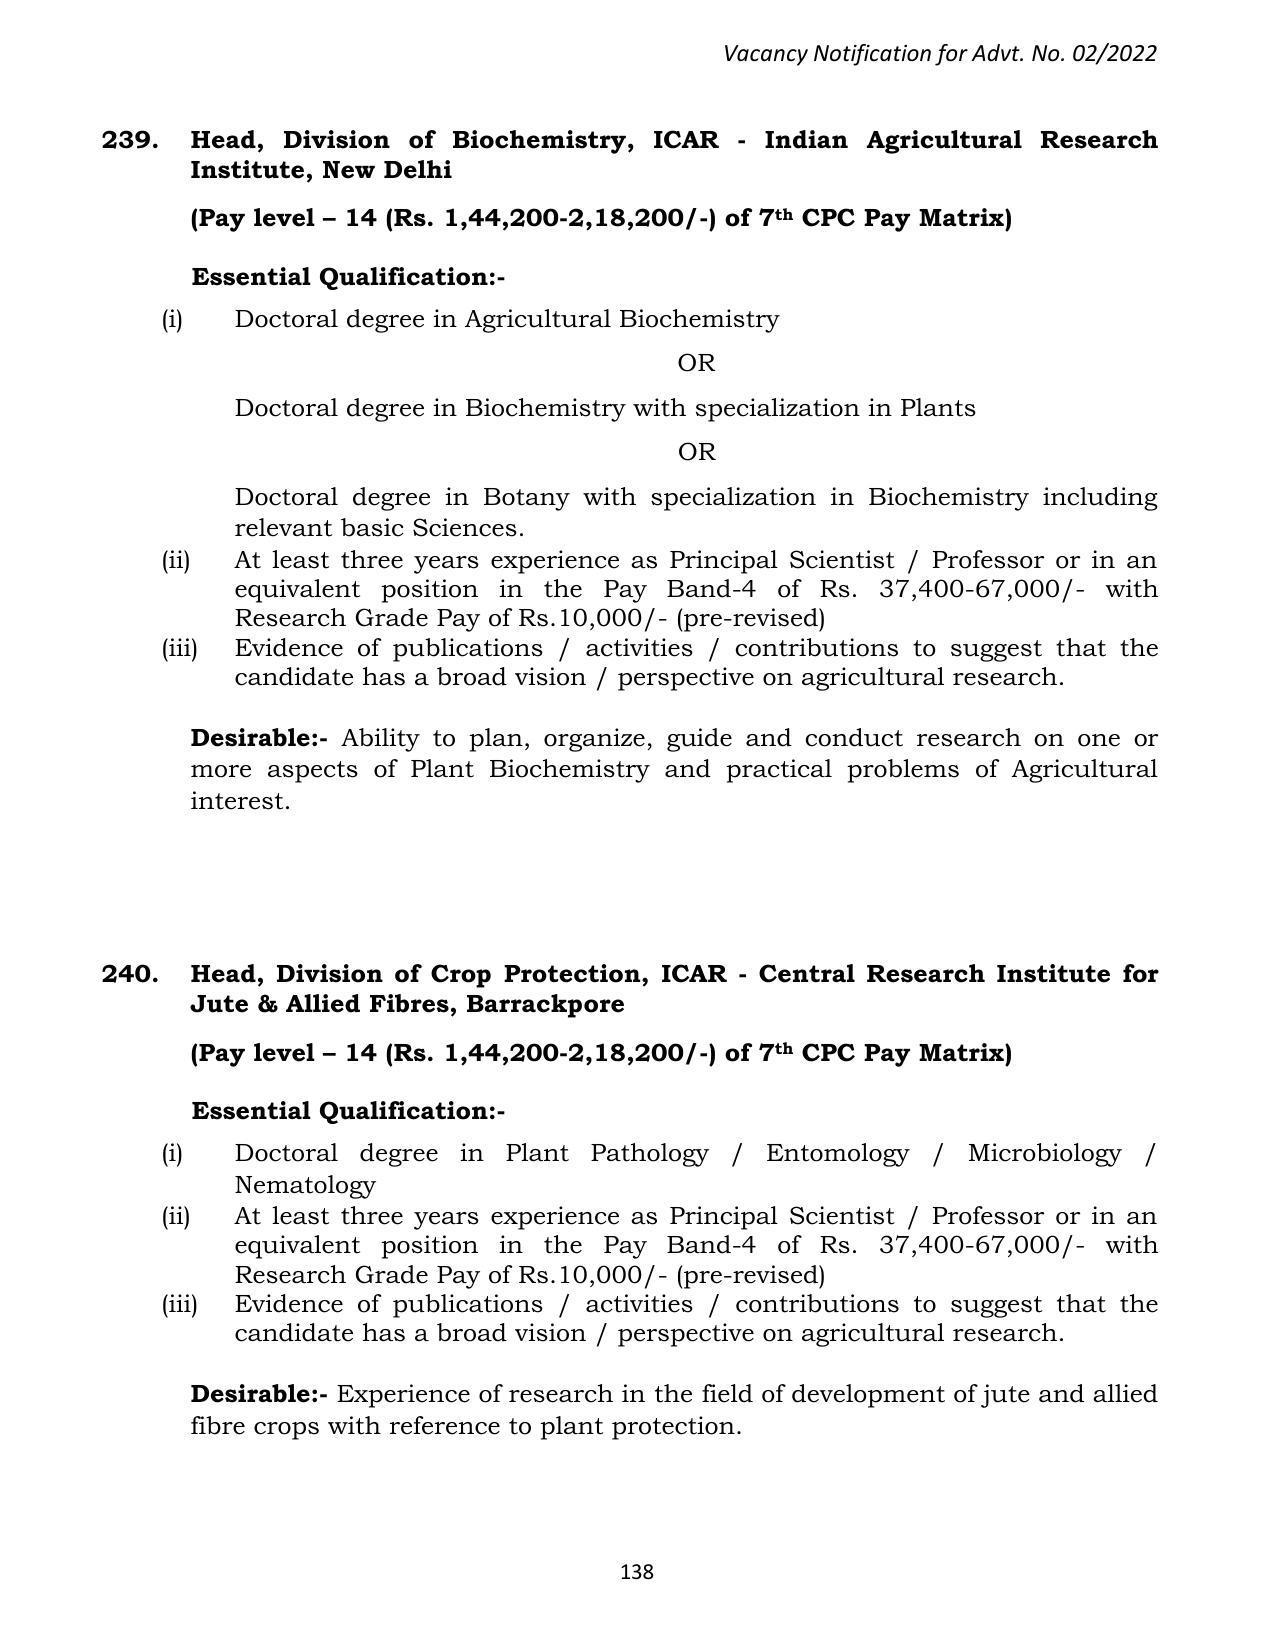 ASRB Non-Research Management Recruitment 2022 - Page 83